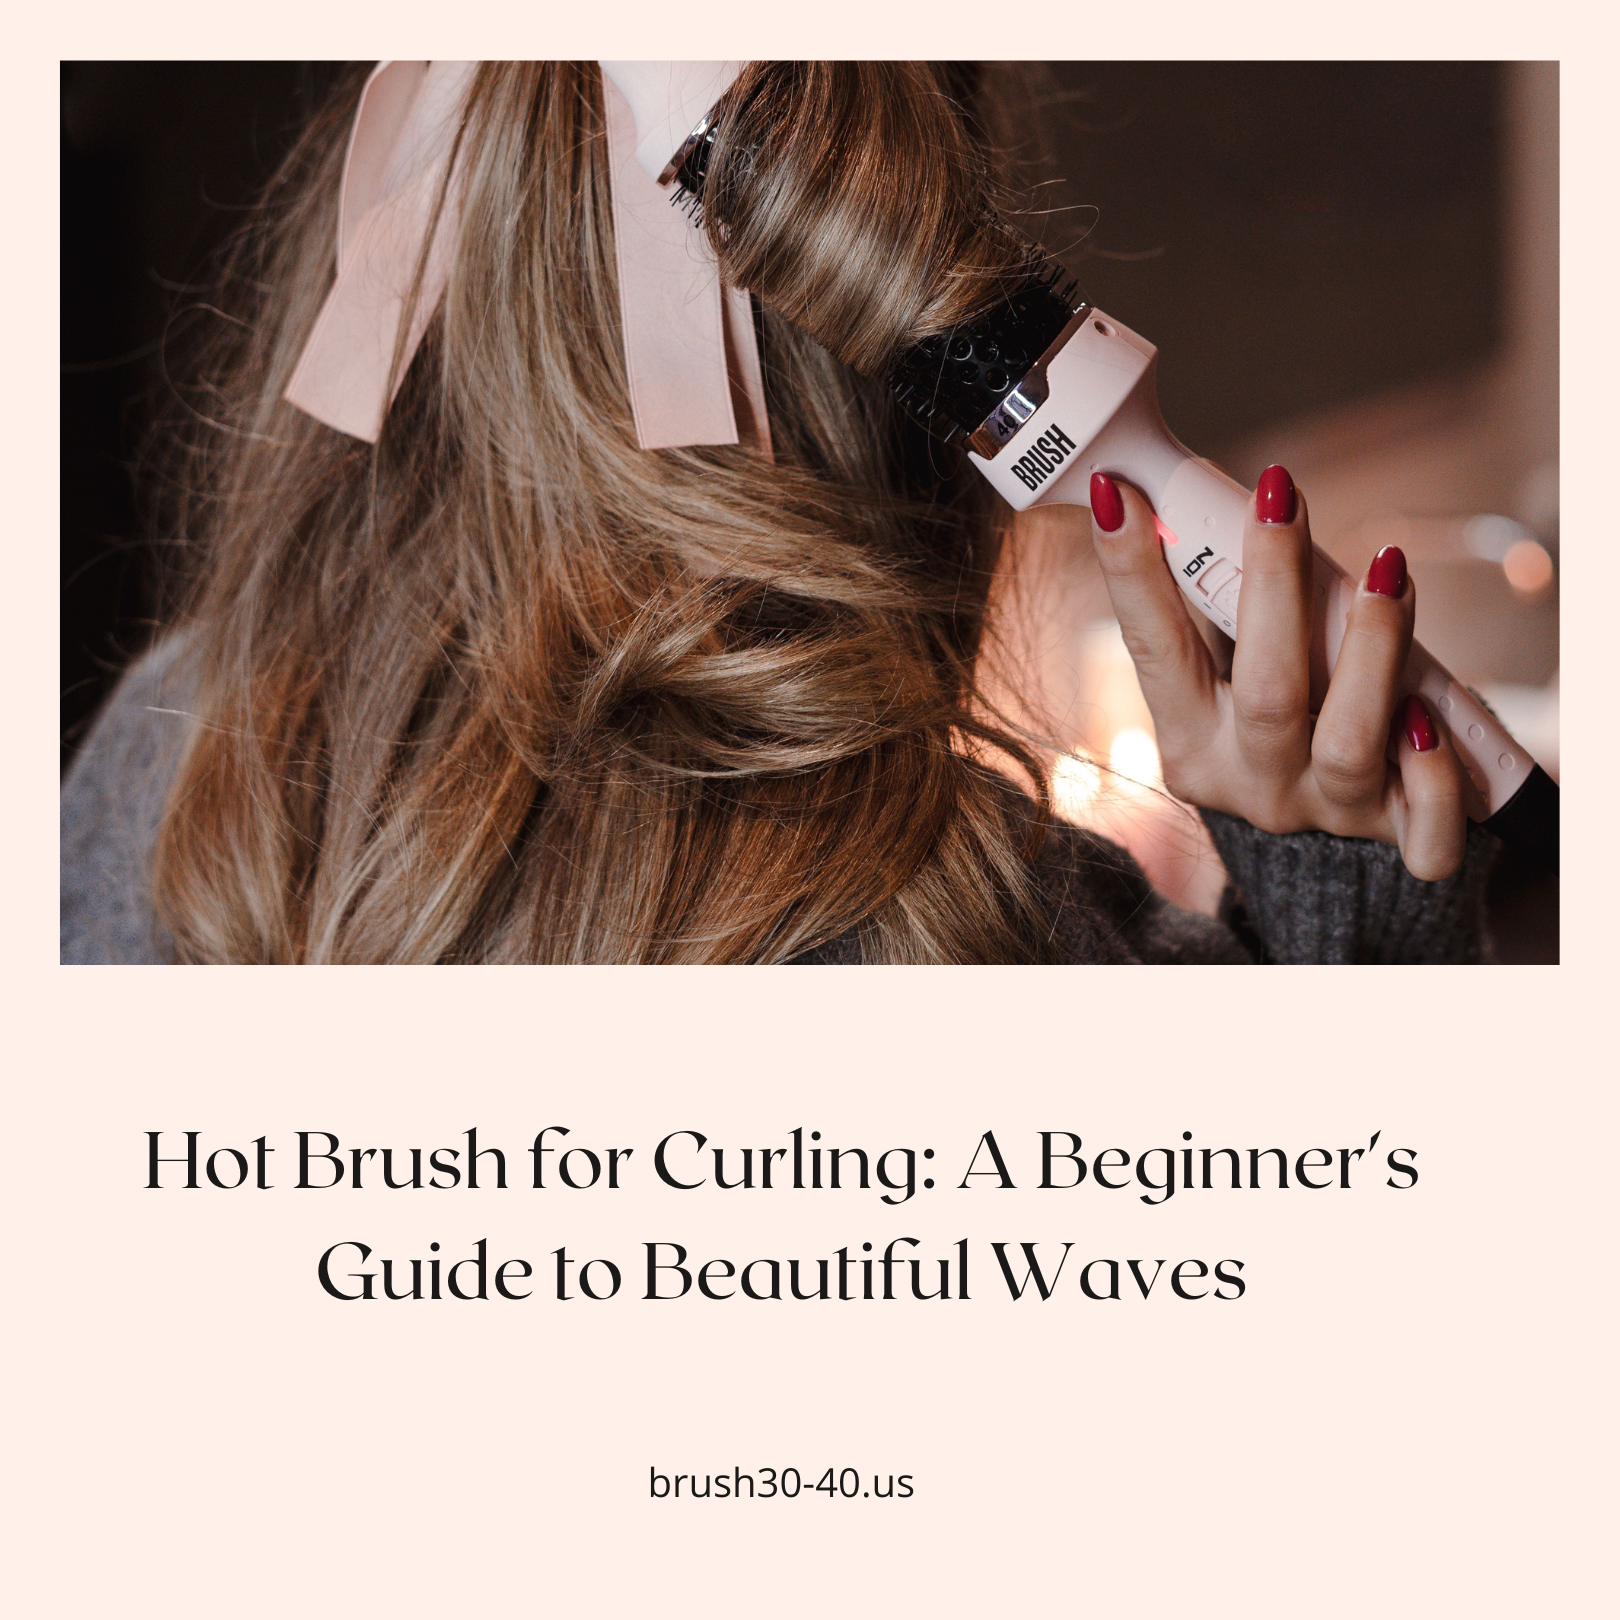 Hot Brush for Curling: A Beginner's Guide to Beautiful Waves